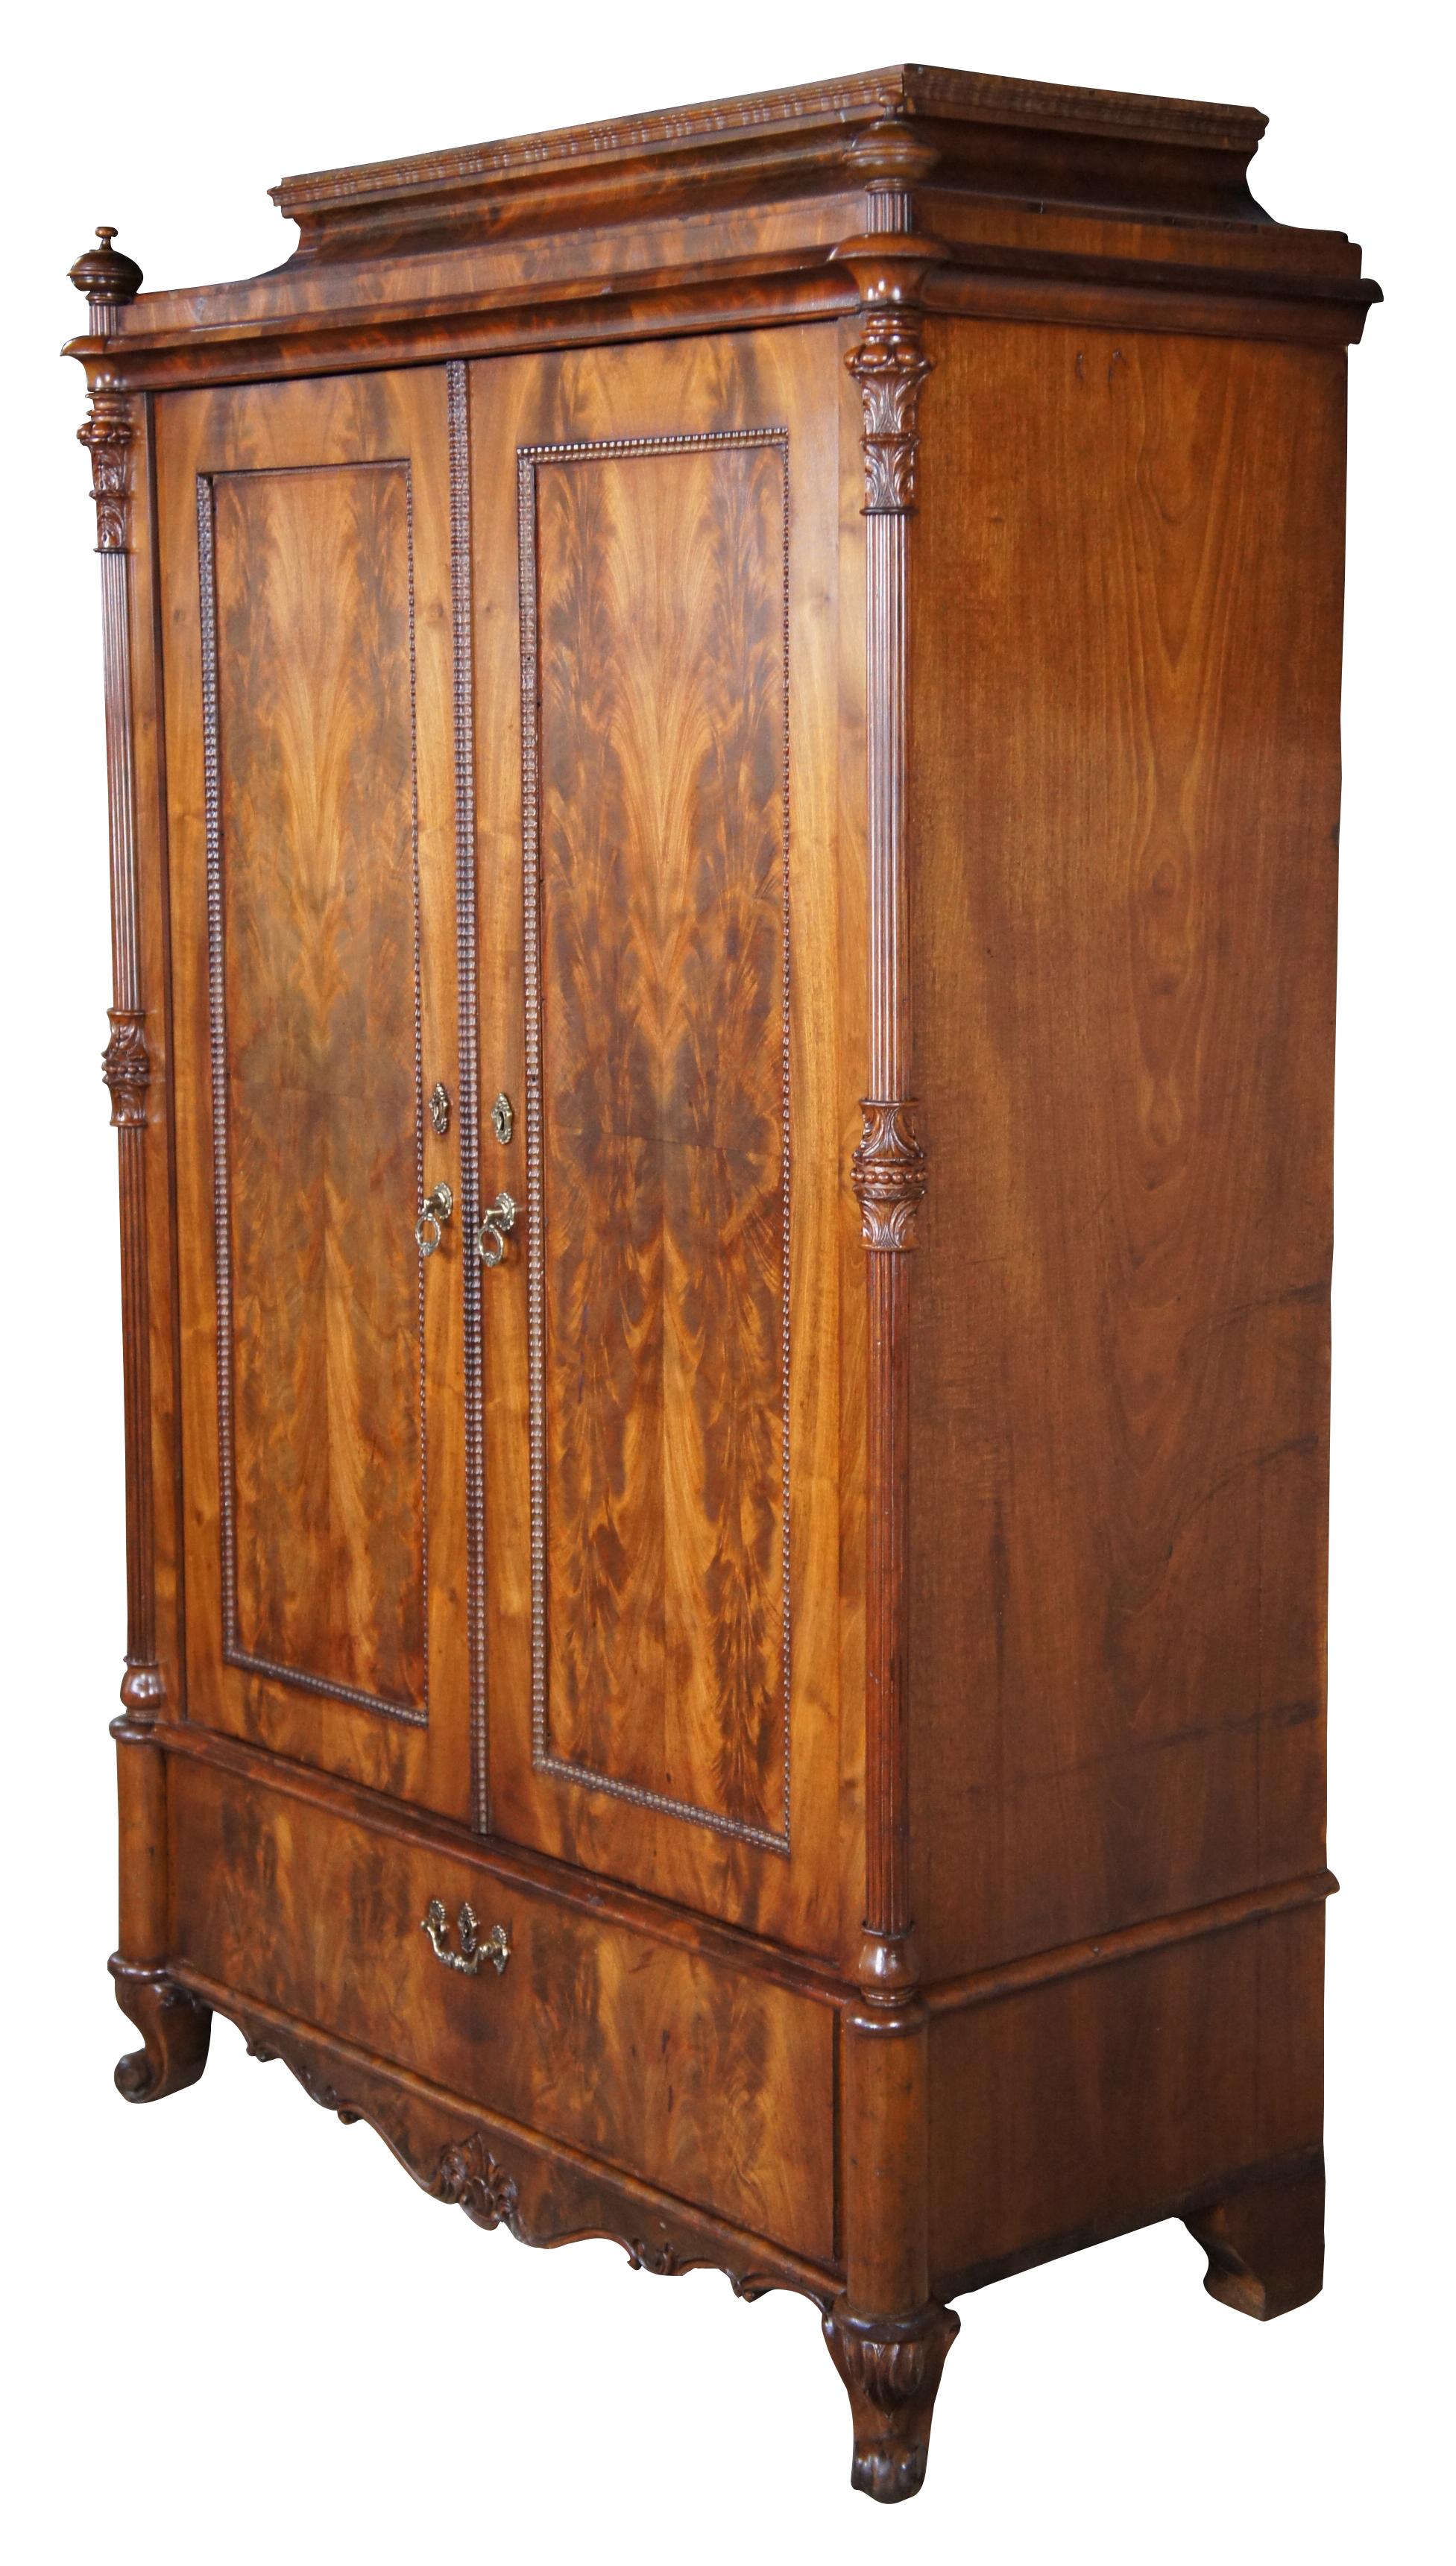 An exquisite American Empire diminutive wardrobe, circa mid 19th century. Made from flame mahogany with double doors over large lower drawer. Features 3/4 cut reeded columns with foliate details, nubby spire finials, ripple trim, brass hardware,